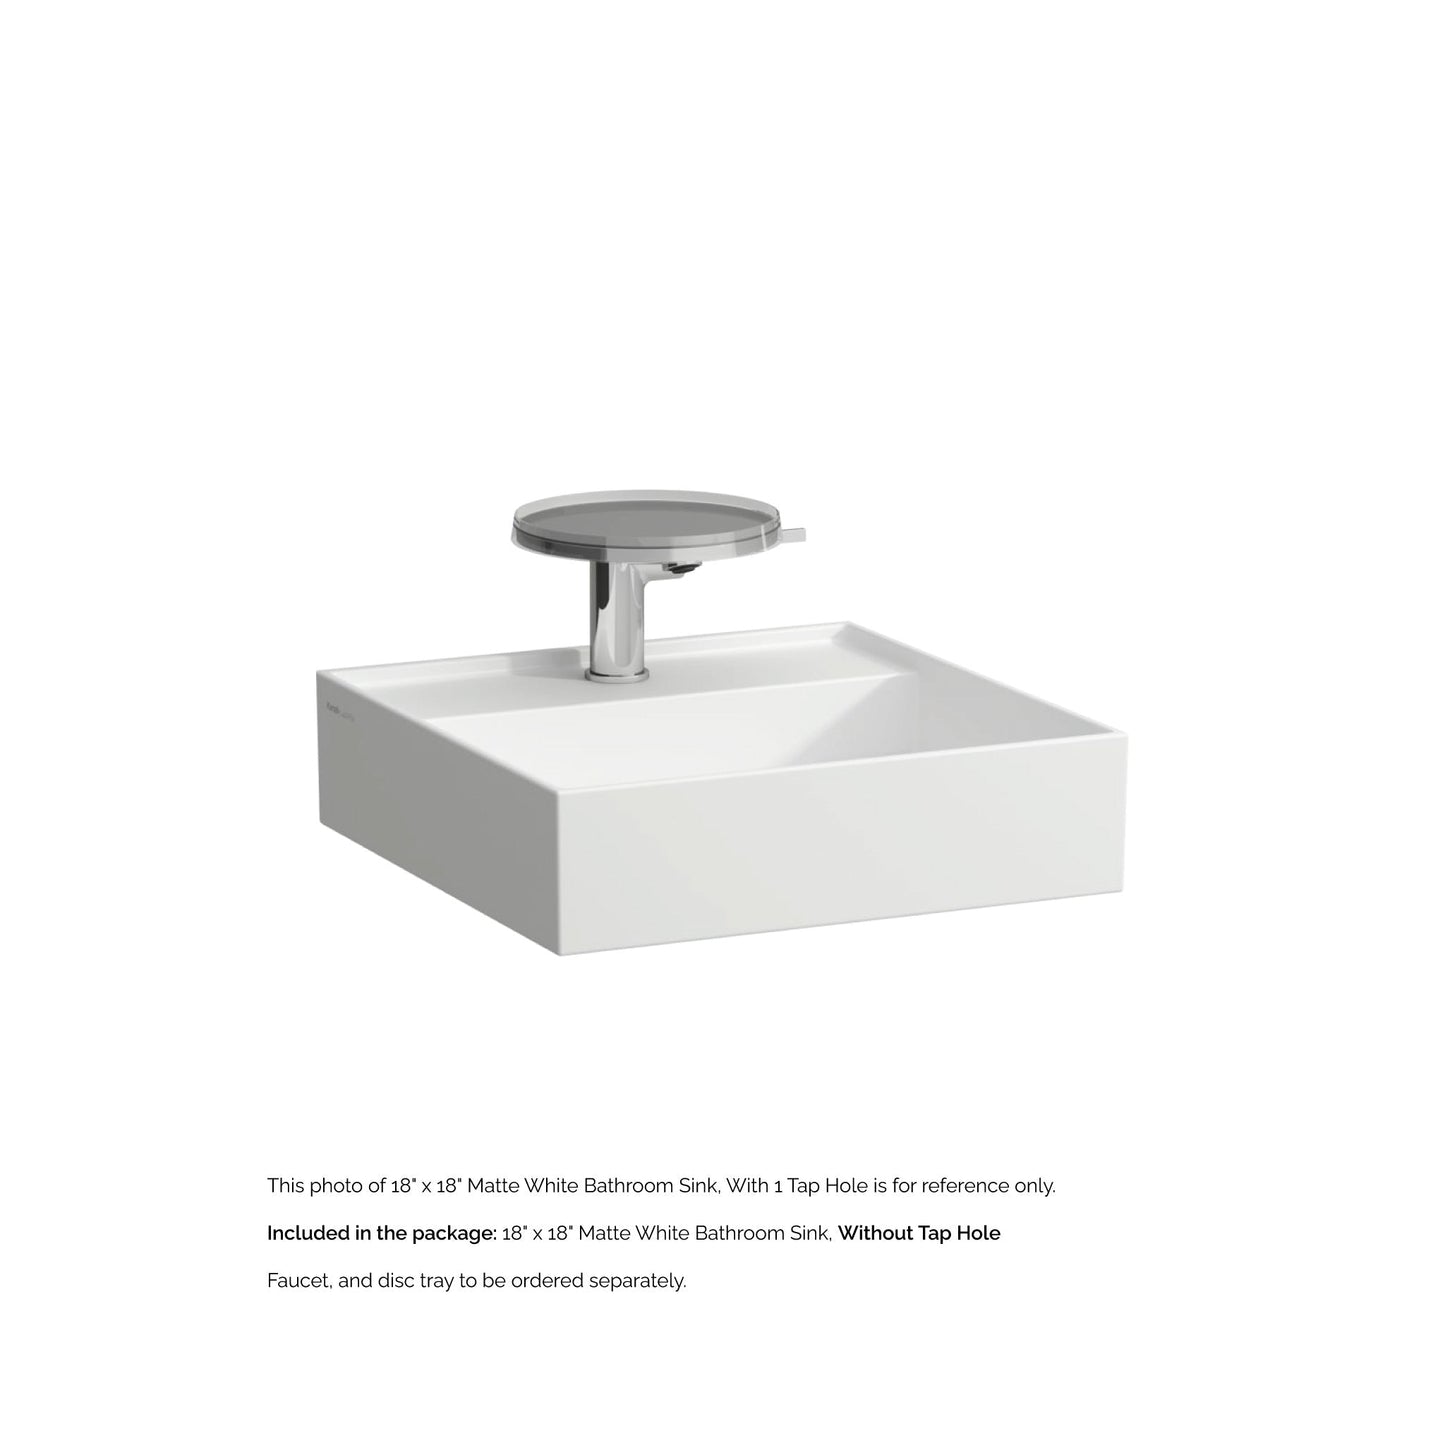 Laufen Kartell 18" x 18" Matte White Wall-Mounted Bathroom Sink Without Faucet Hole